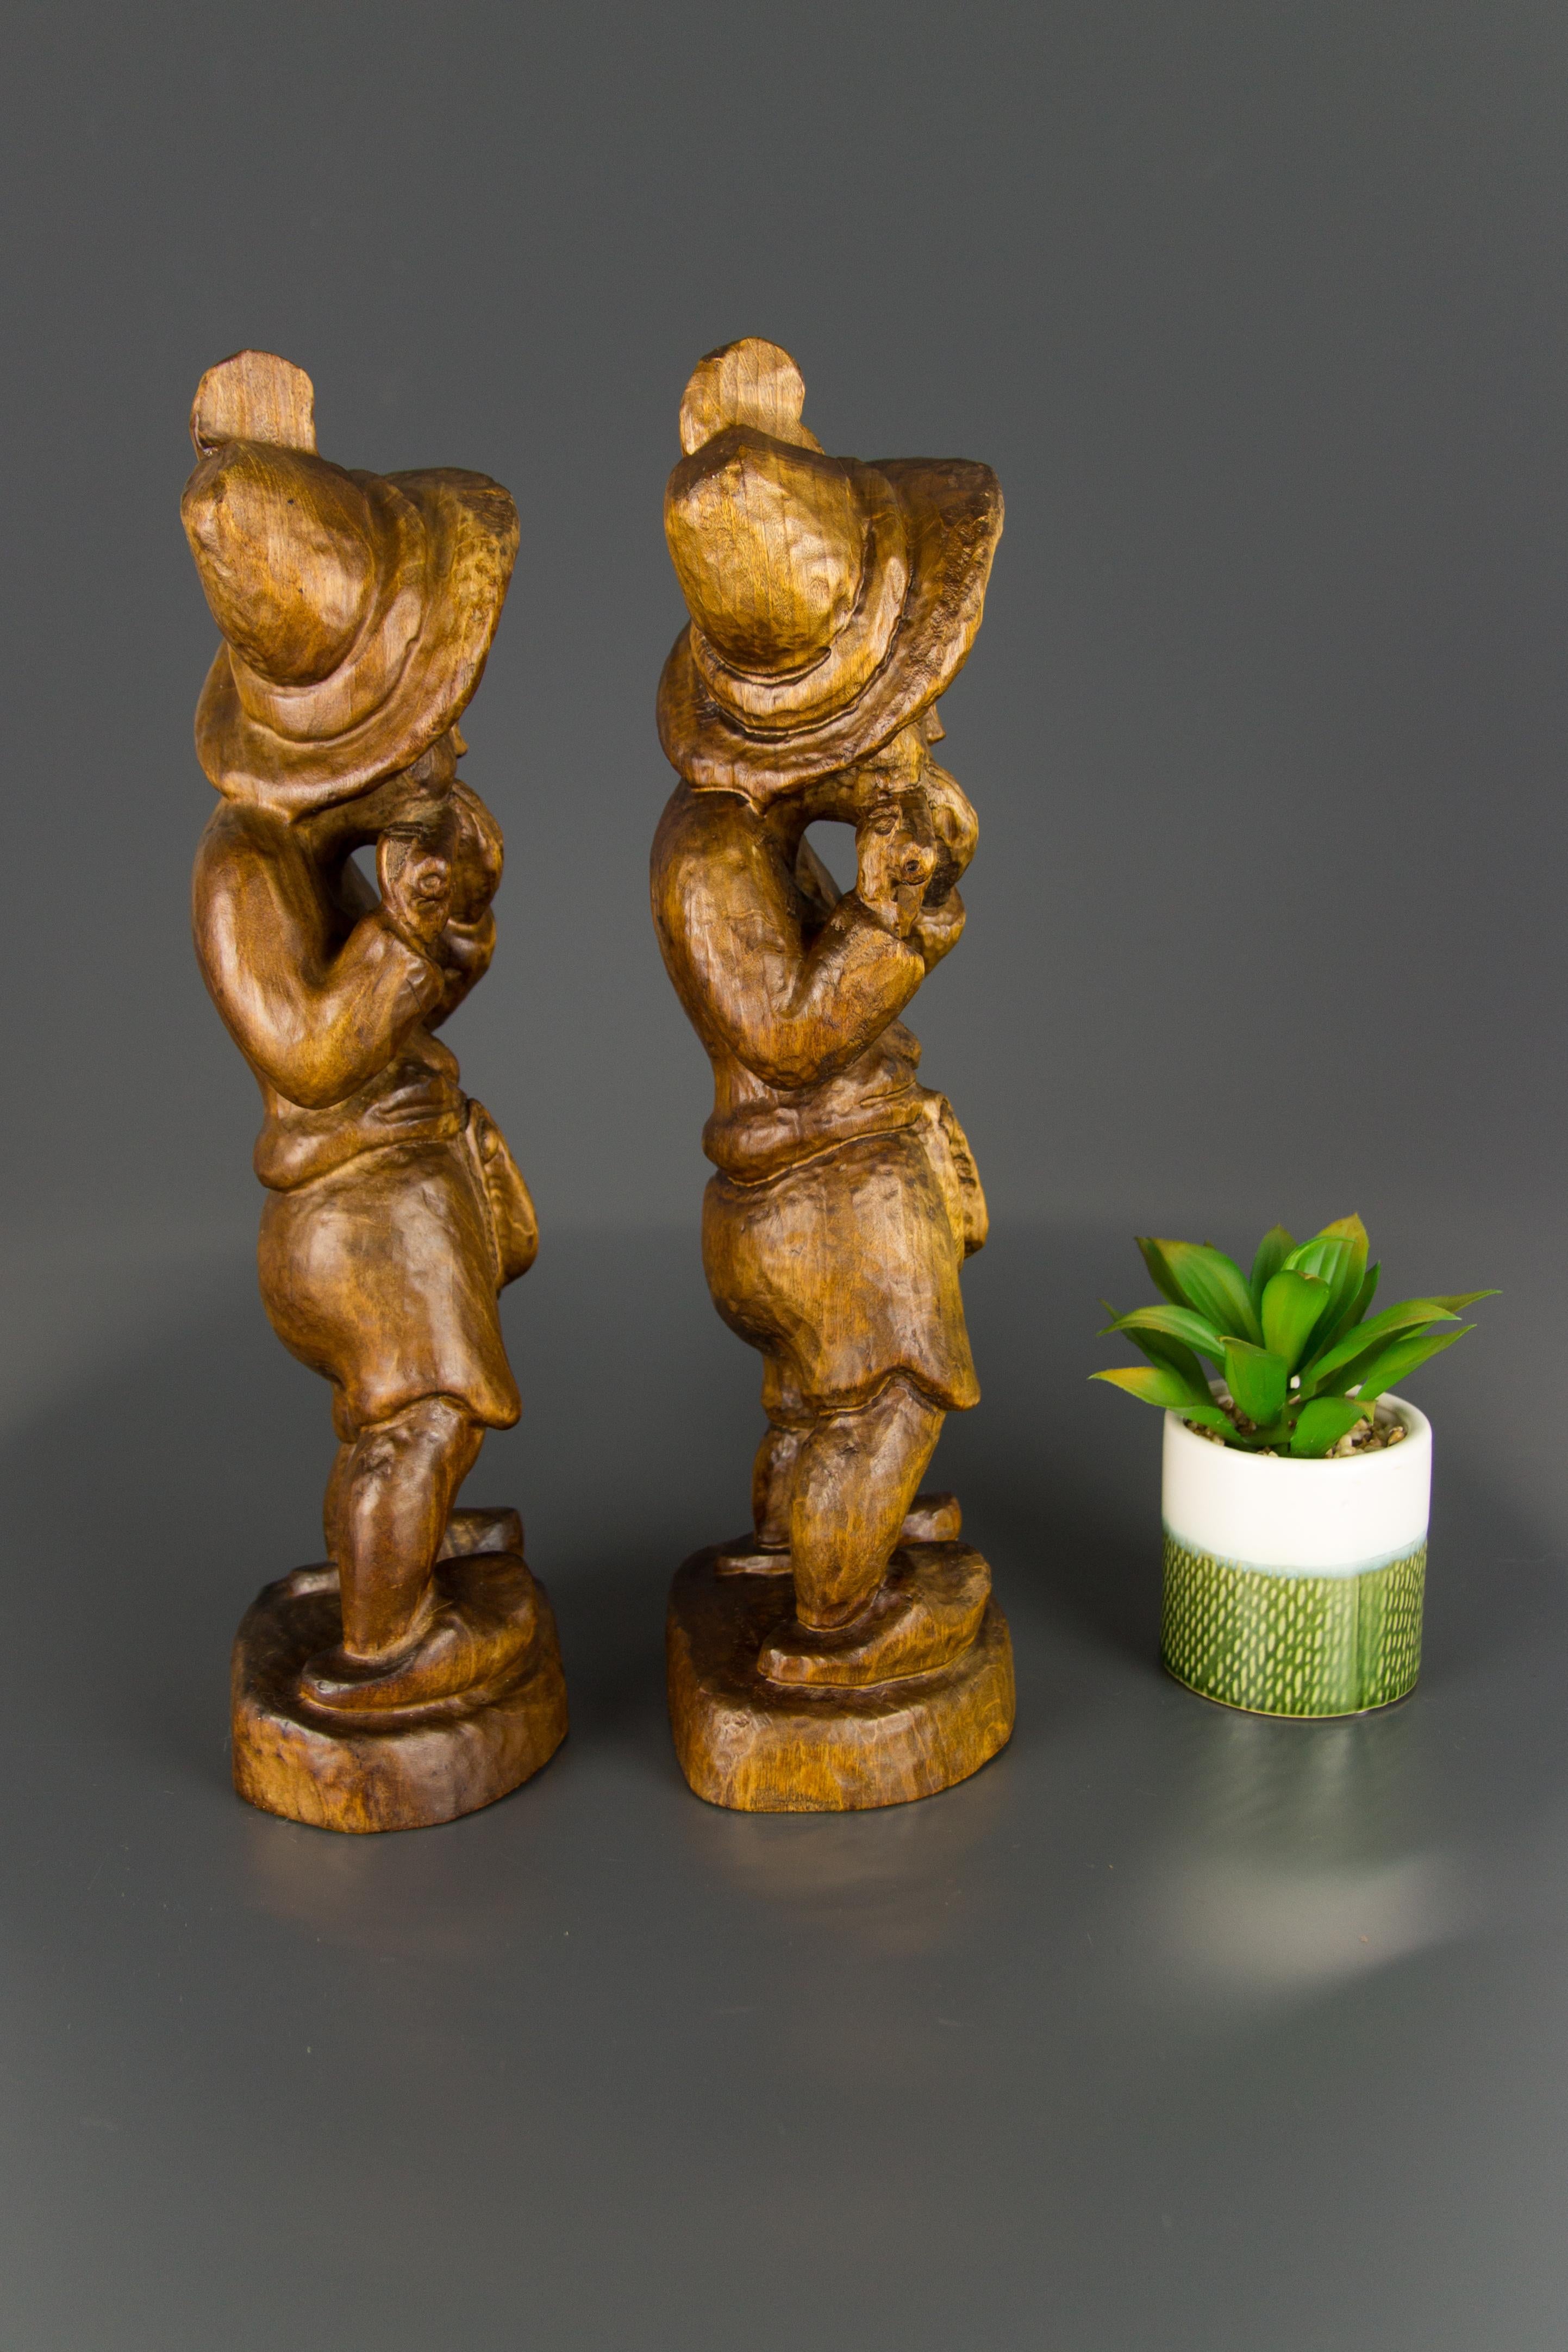 Mid-20th Century Pair of German Hand Carved Wood Figurative Sculptures of Two Boys Musicians For Sale